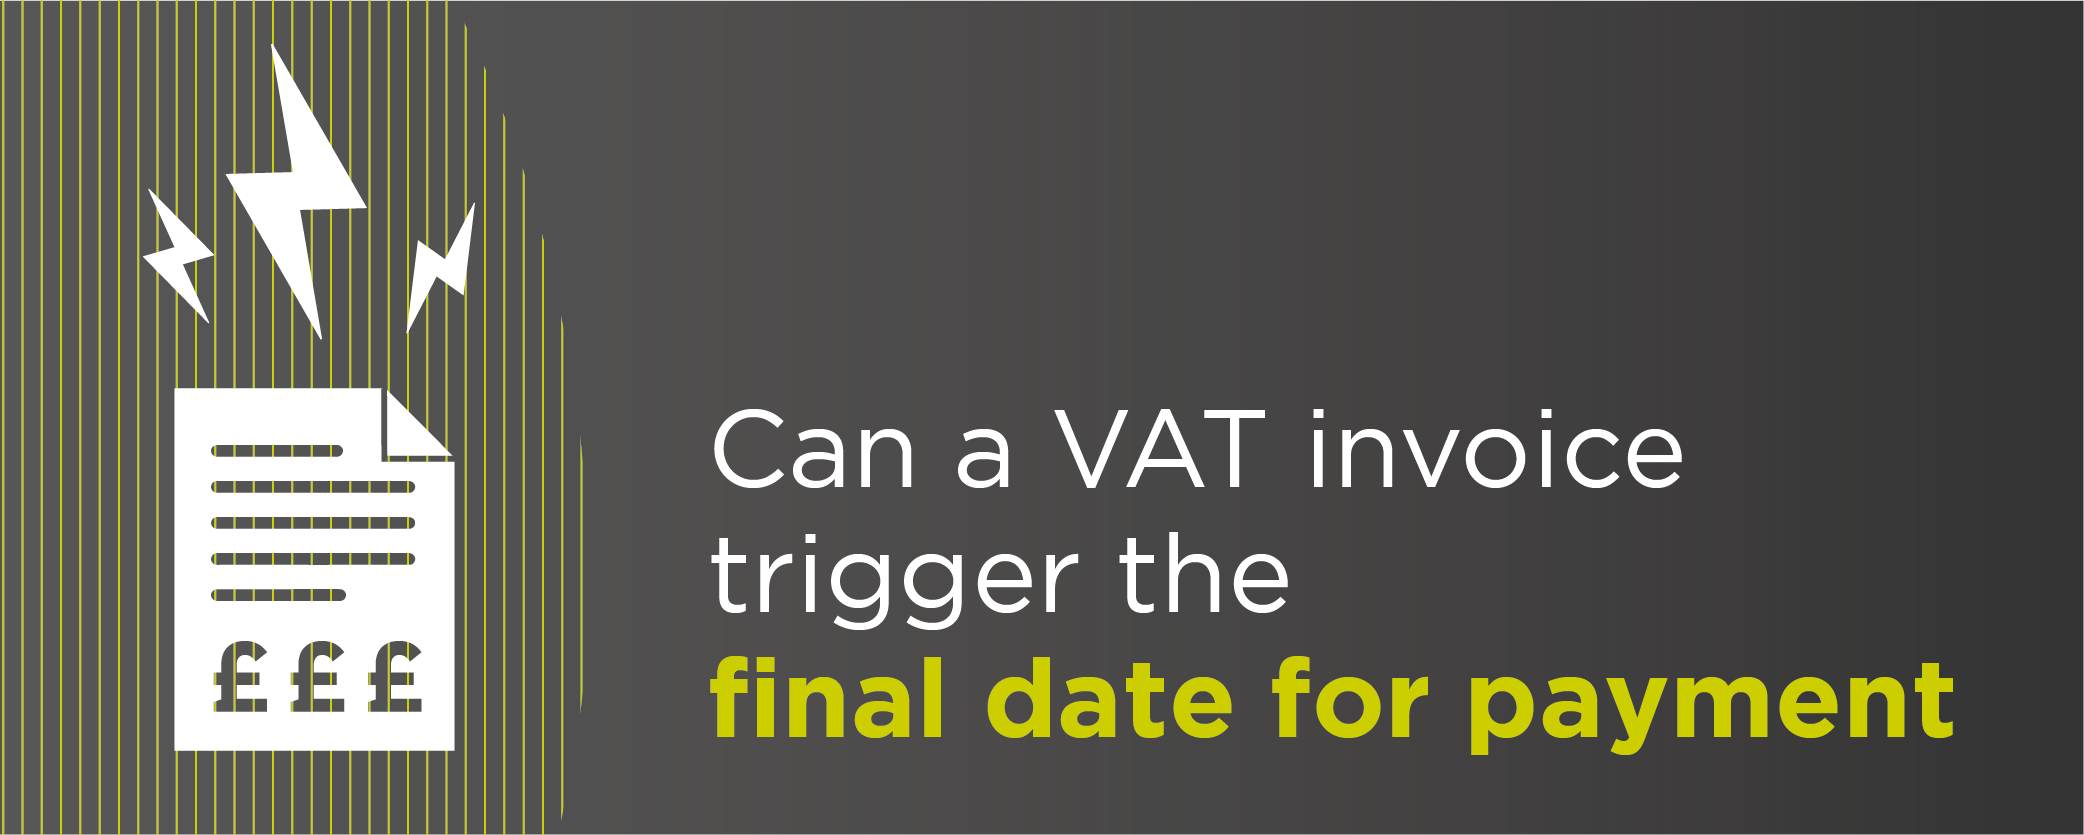 Can a VAT invoice trigger the final date for payment?